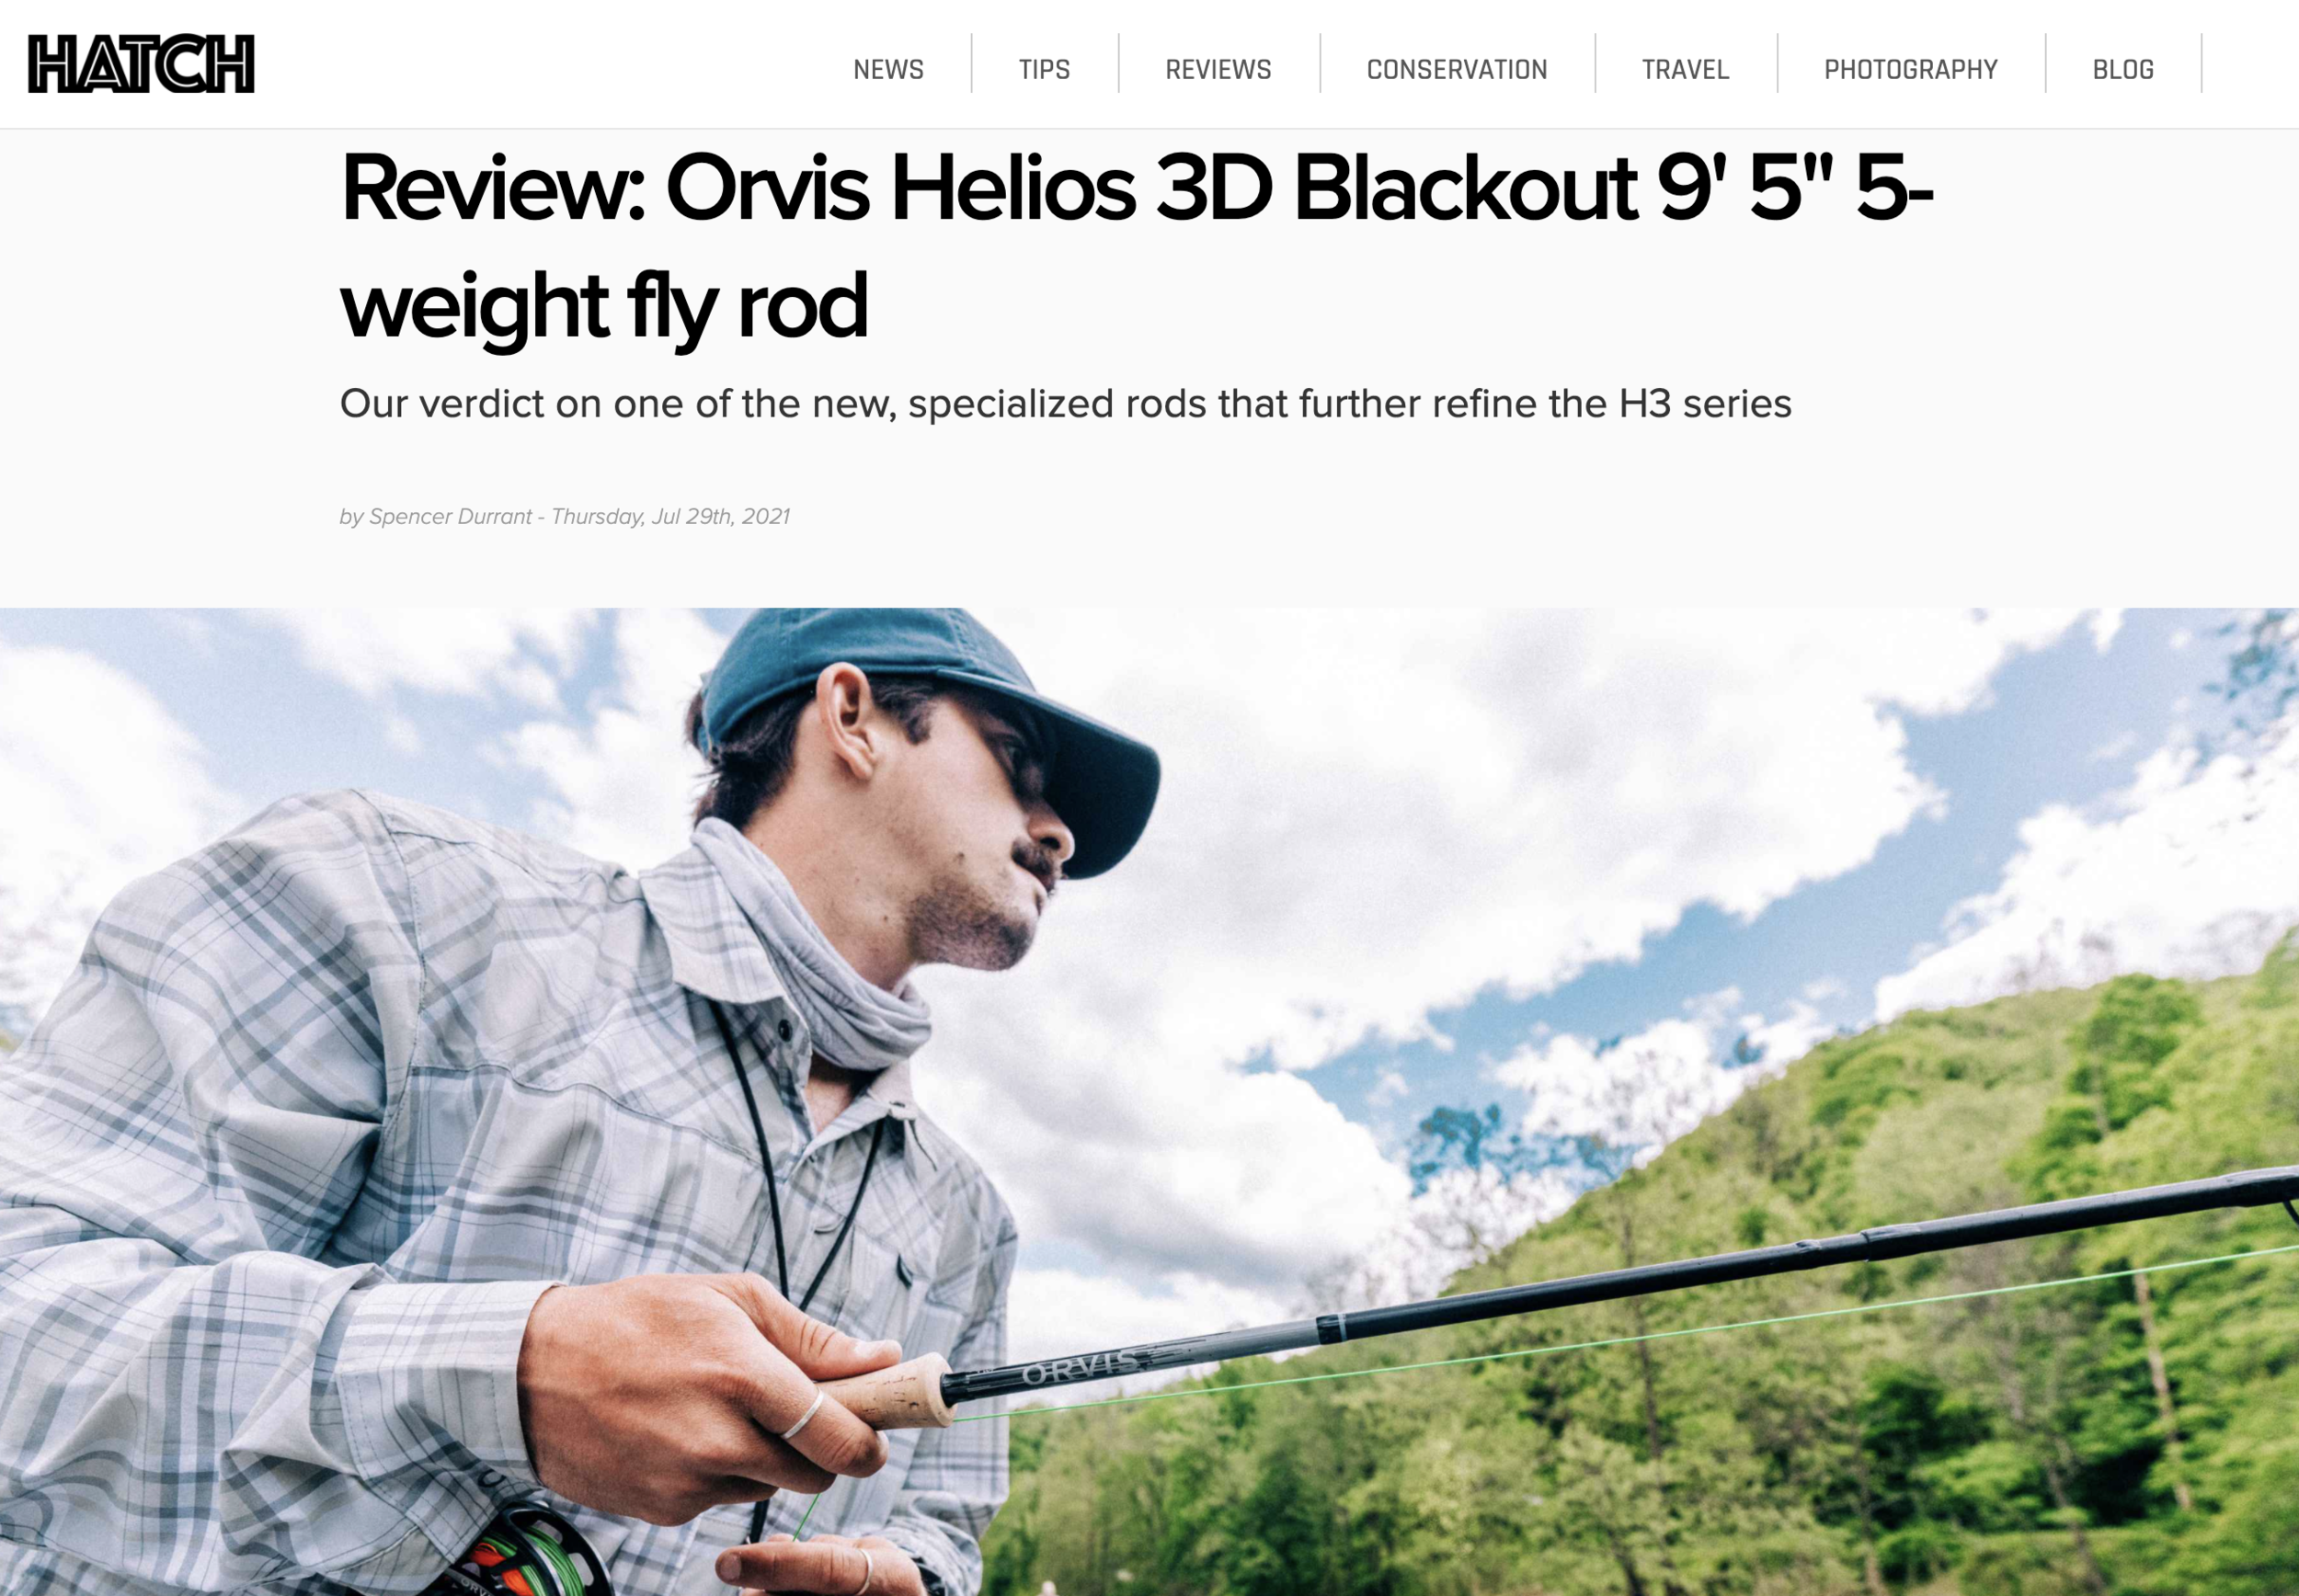 Hatch review of Orvis H3 Blackout rods